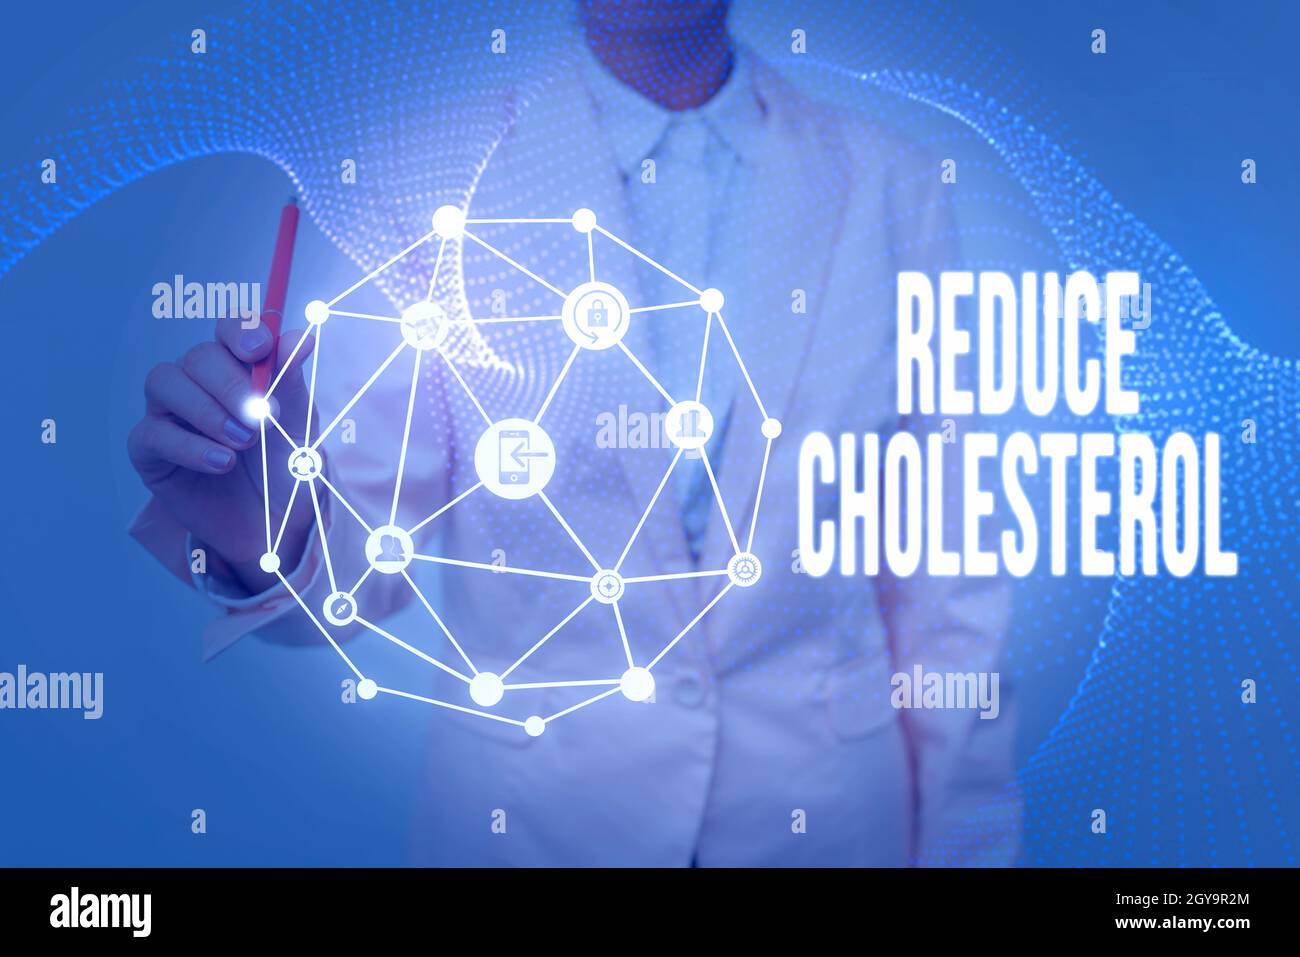 Text caption presenting Reduce Cholesterol, Business approach lessen the intake of saturated fats in the diet Lady In Uniform Holding Tablet In Hand V Stock Photo